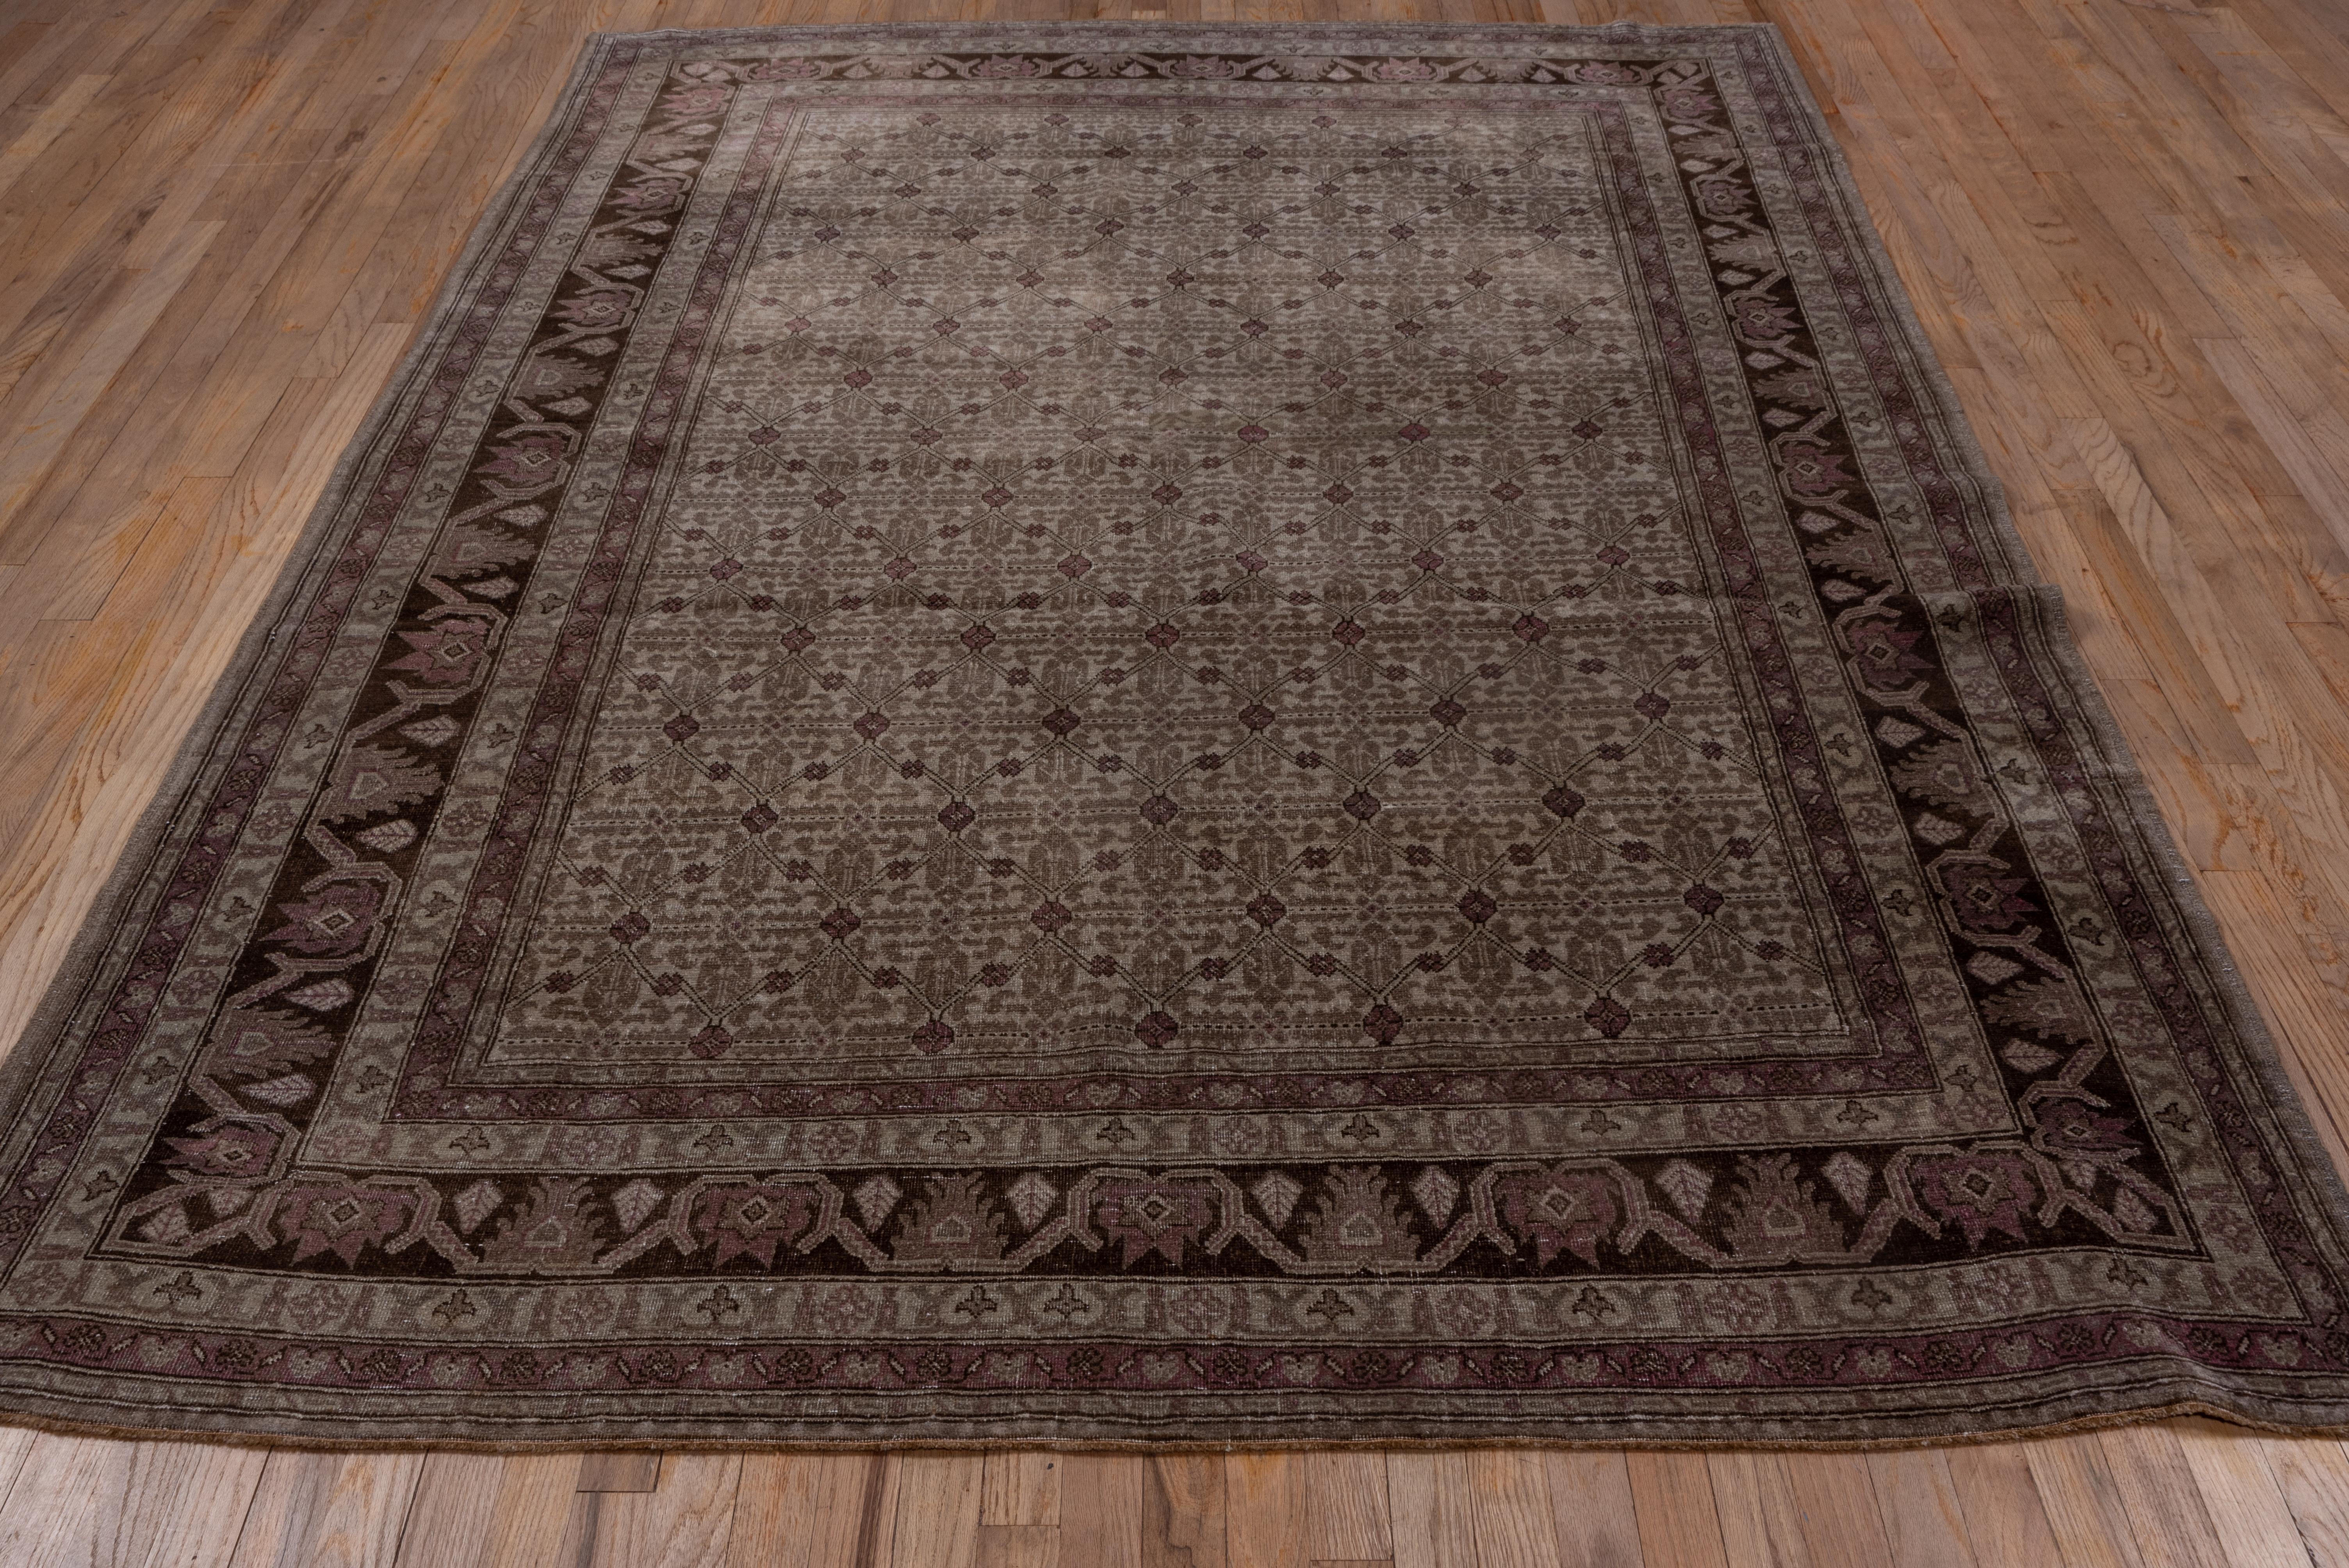 The light beige field of this carpet supports an allover pattern of linked rosettes in a lozenge pattern with stylized leaves and botehs. The brown border shows a stiff, split vine with palmettes and leaves. The handle is chunky and meaty.